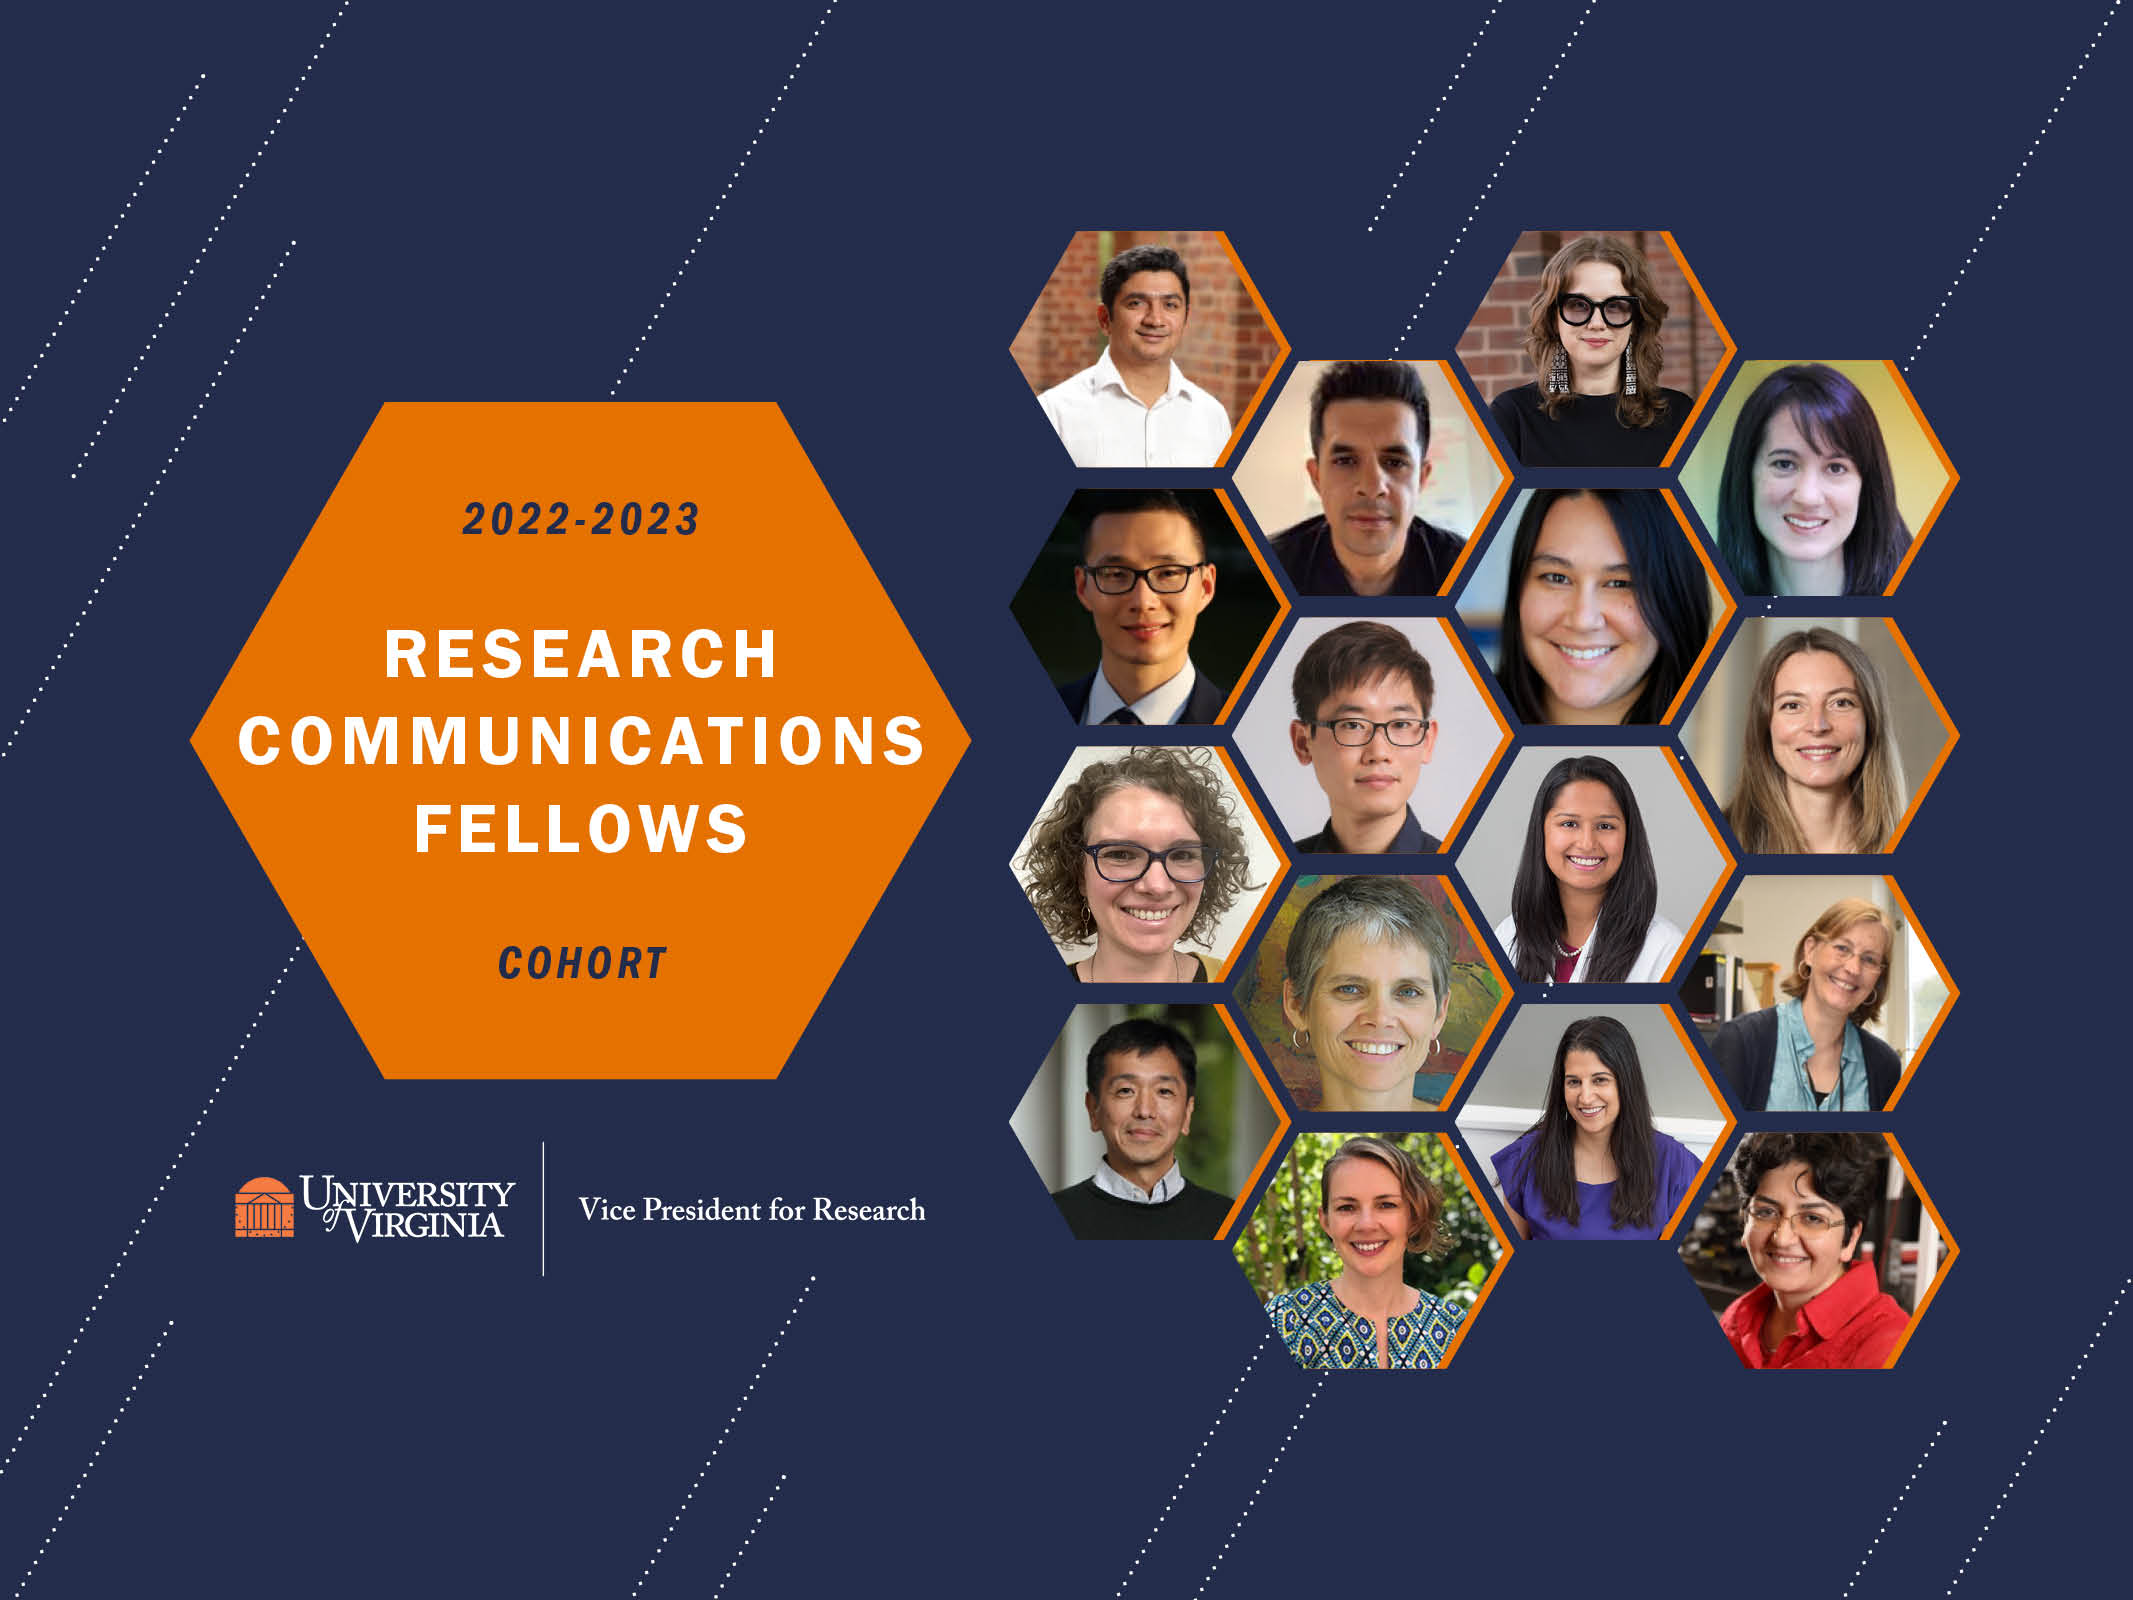 Collage of Research Communications Fellows